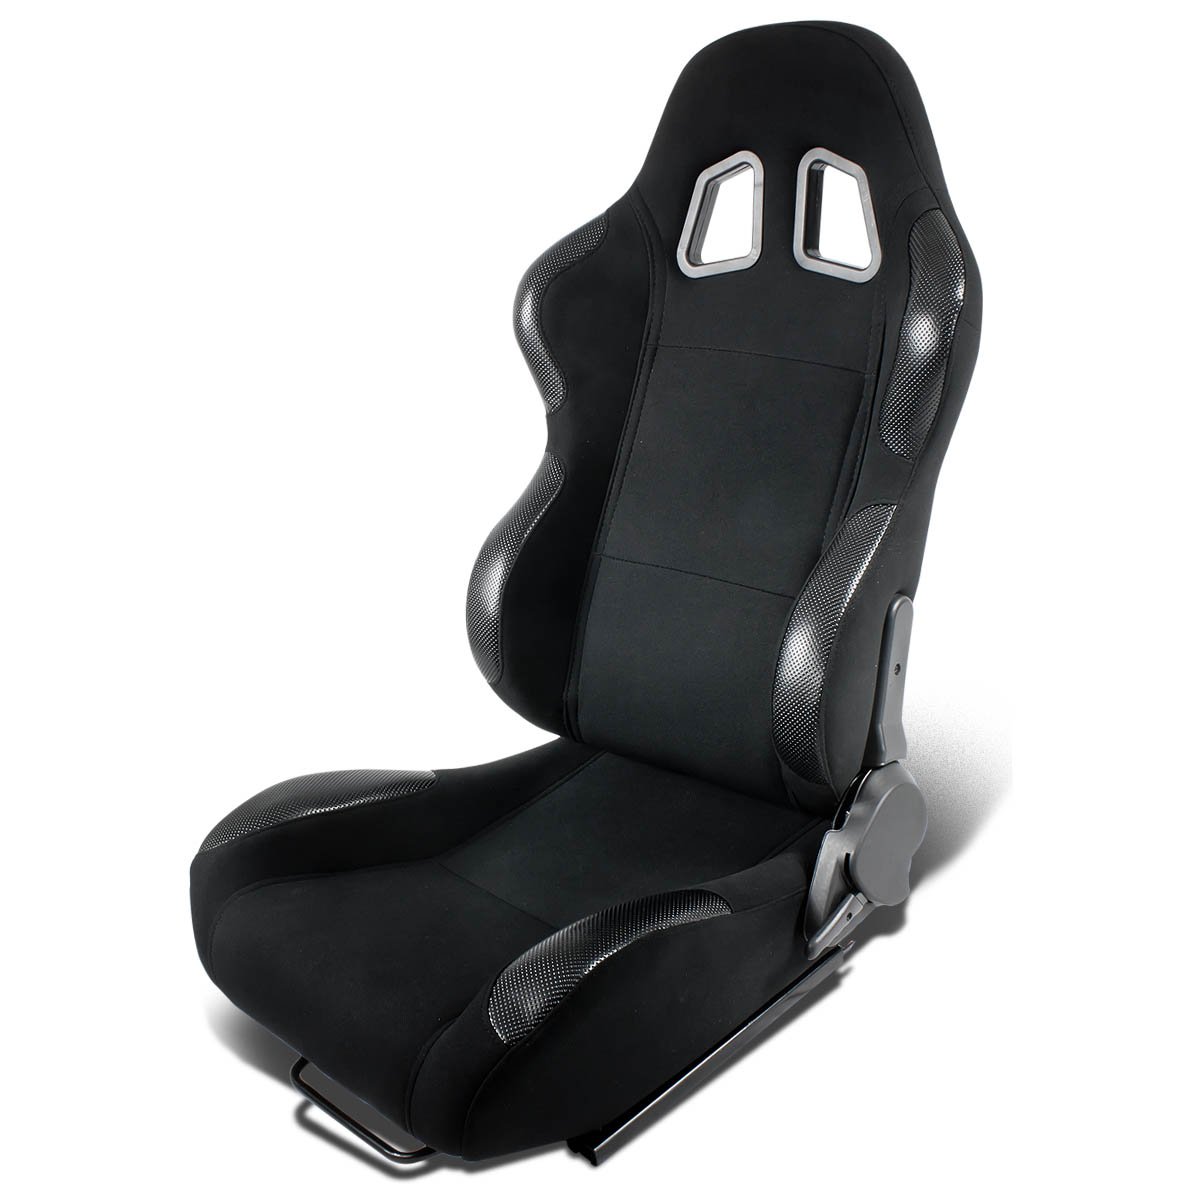 Full Reclinable Black Cloth Carbon Look PVC Leather Type-R Racing Seat+Adjustable  Slider (Left)- Buy Online in Antigua and Barbuda at antigua.desertcart.com.  ProductId : 18706790.